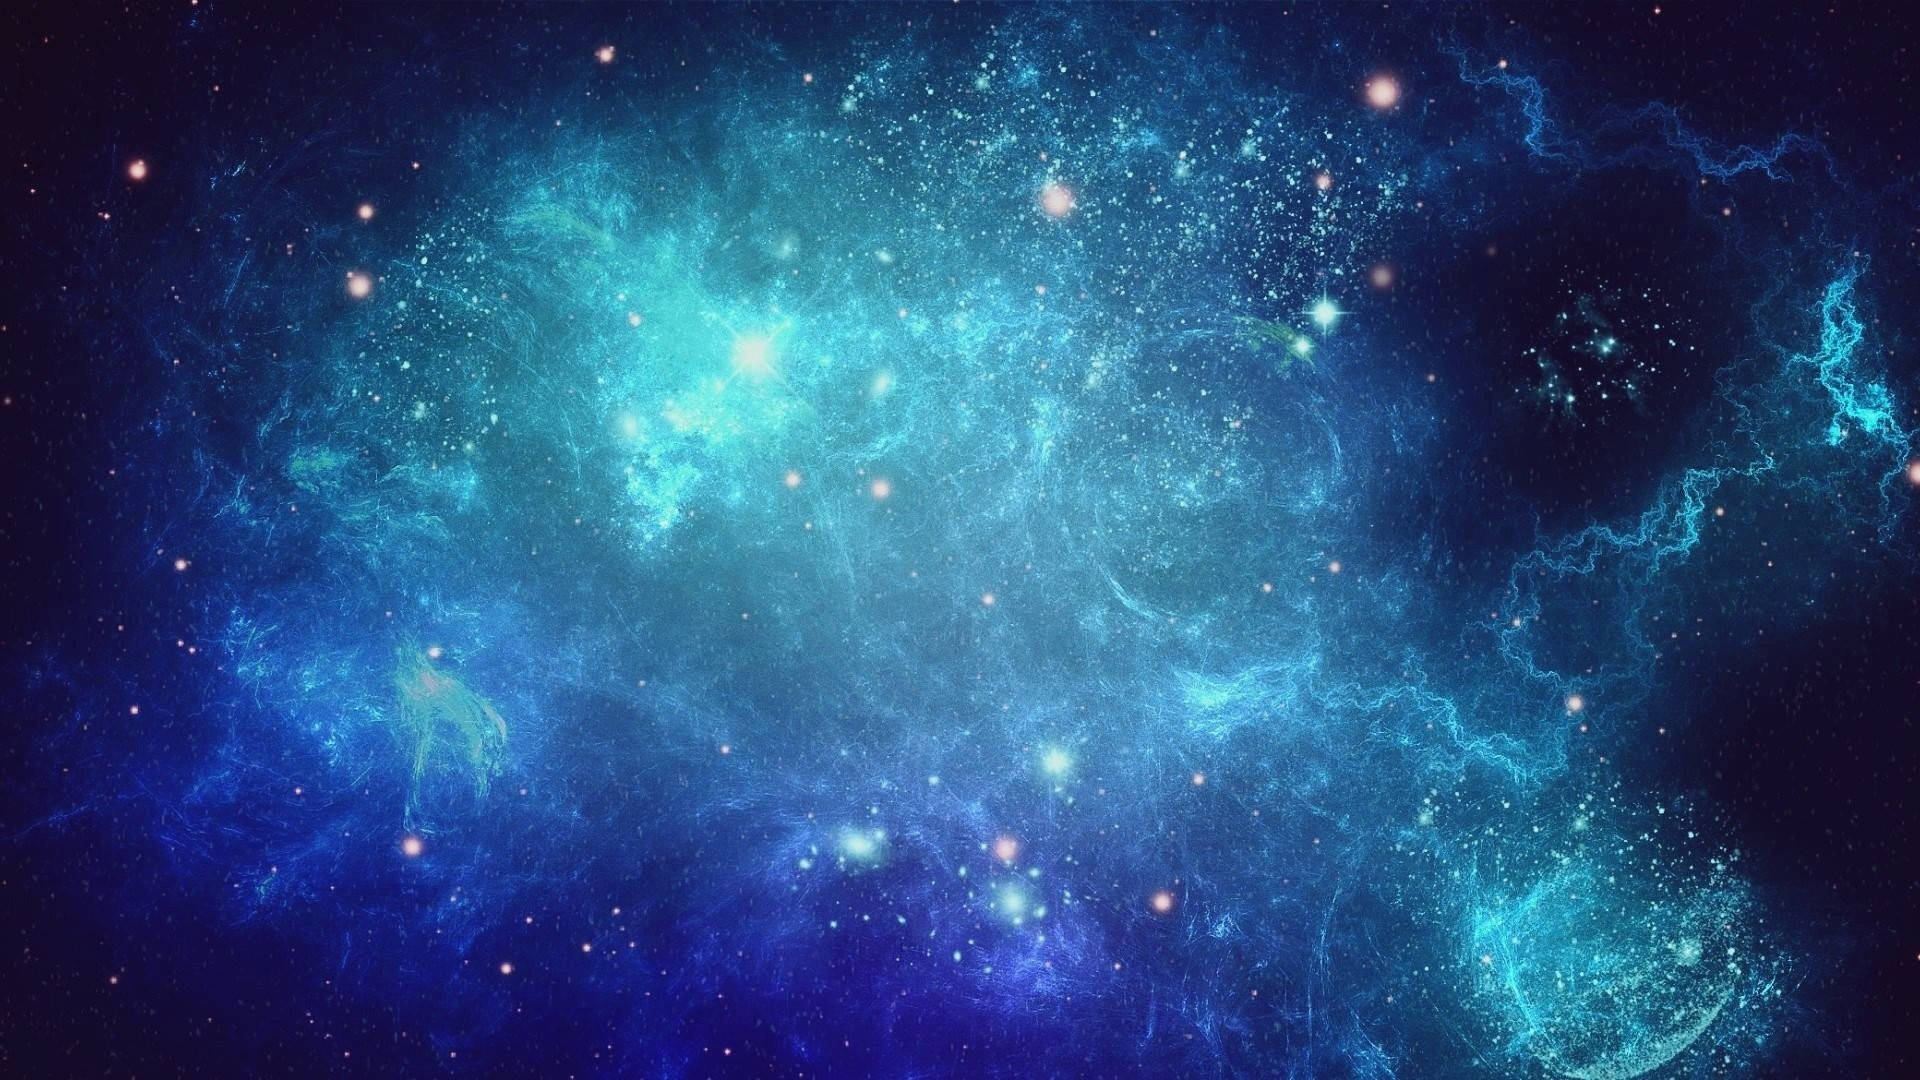 Free Blue Galaxy Wallpaper Downloads, [100+] Blue Galaxy Wallpapers for FREE  